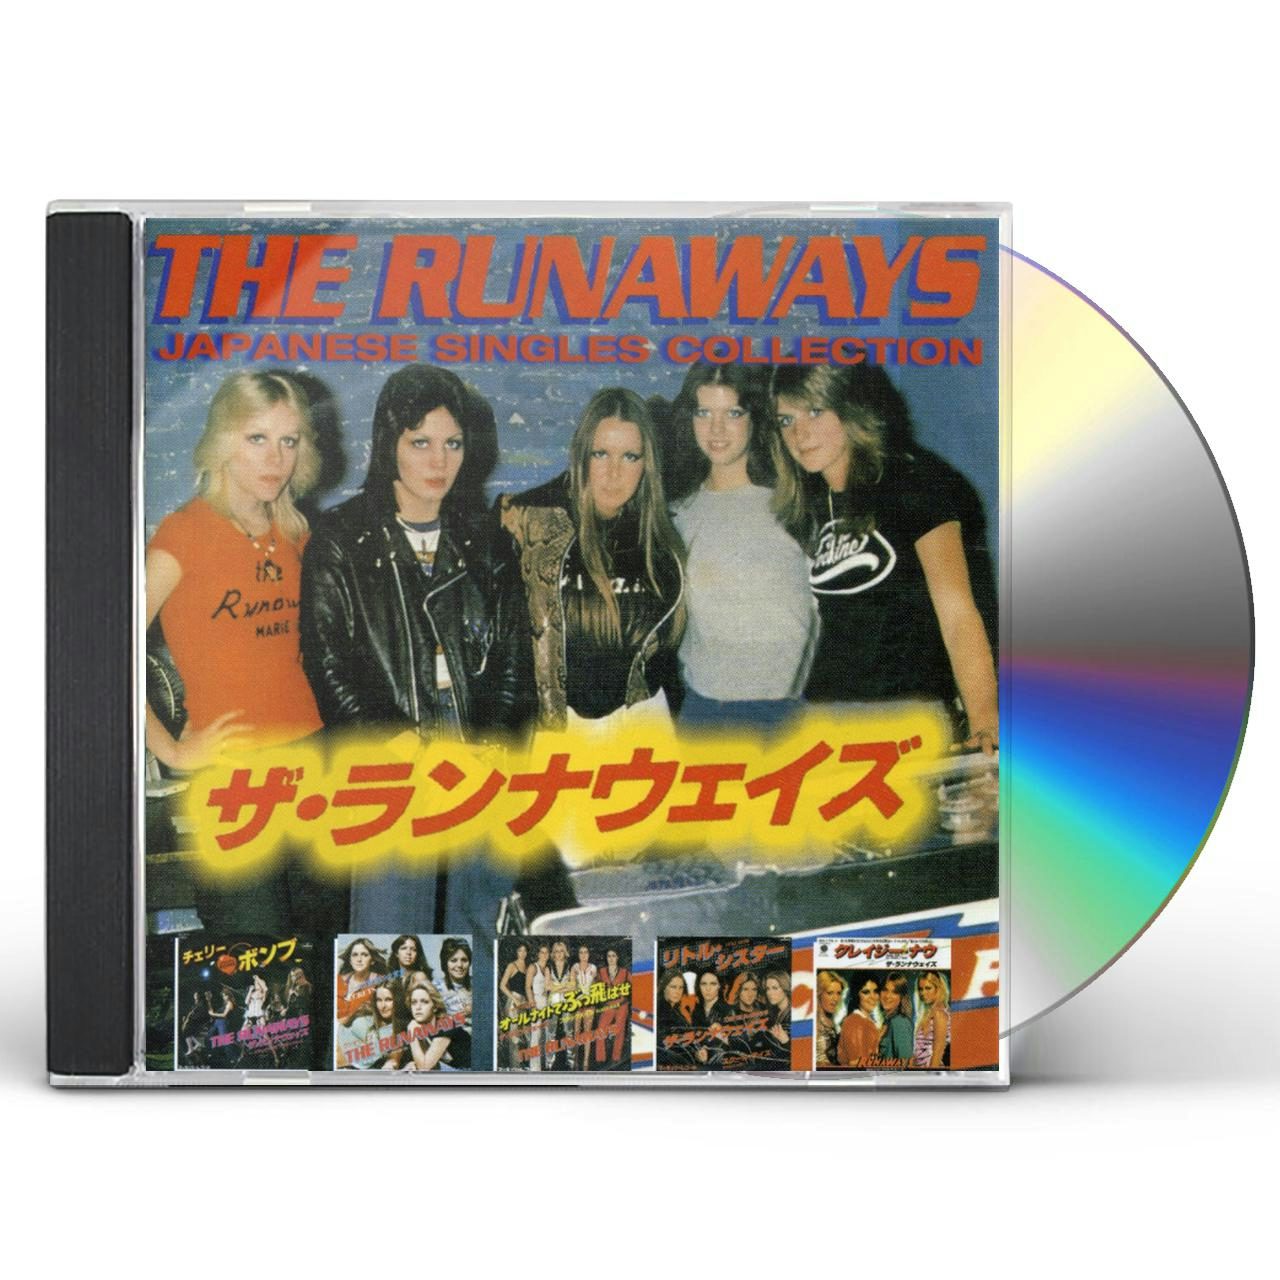 THE RUNAWAYS Japanese Singles Collection - 洋楽